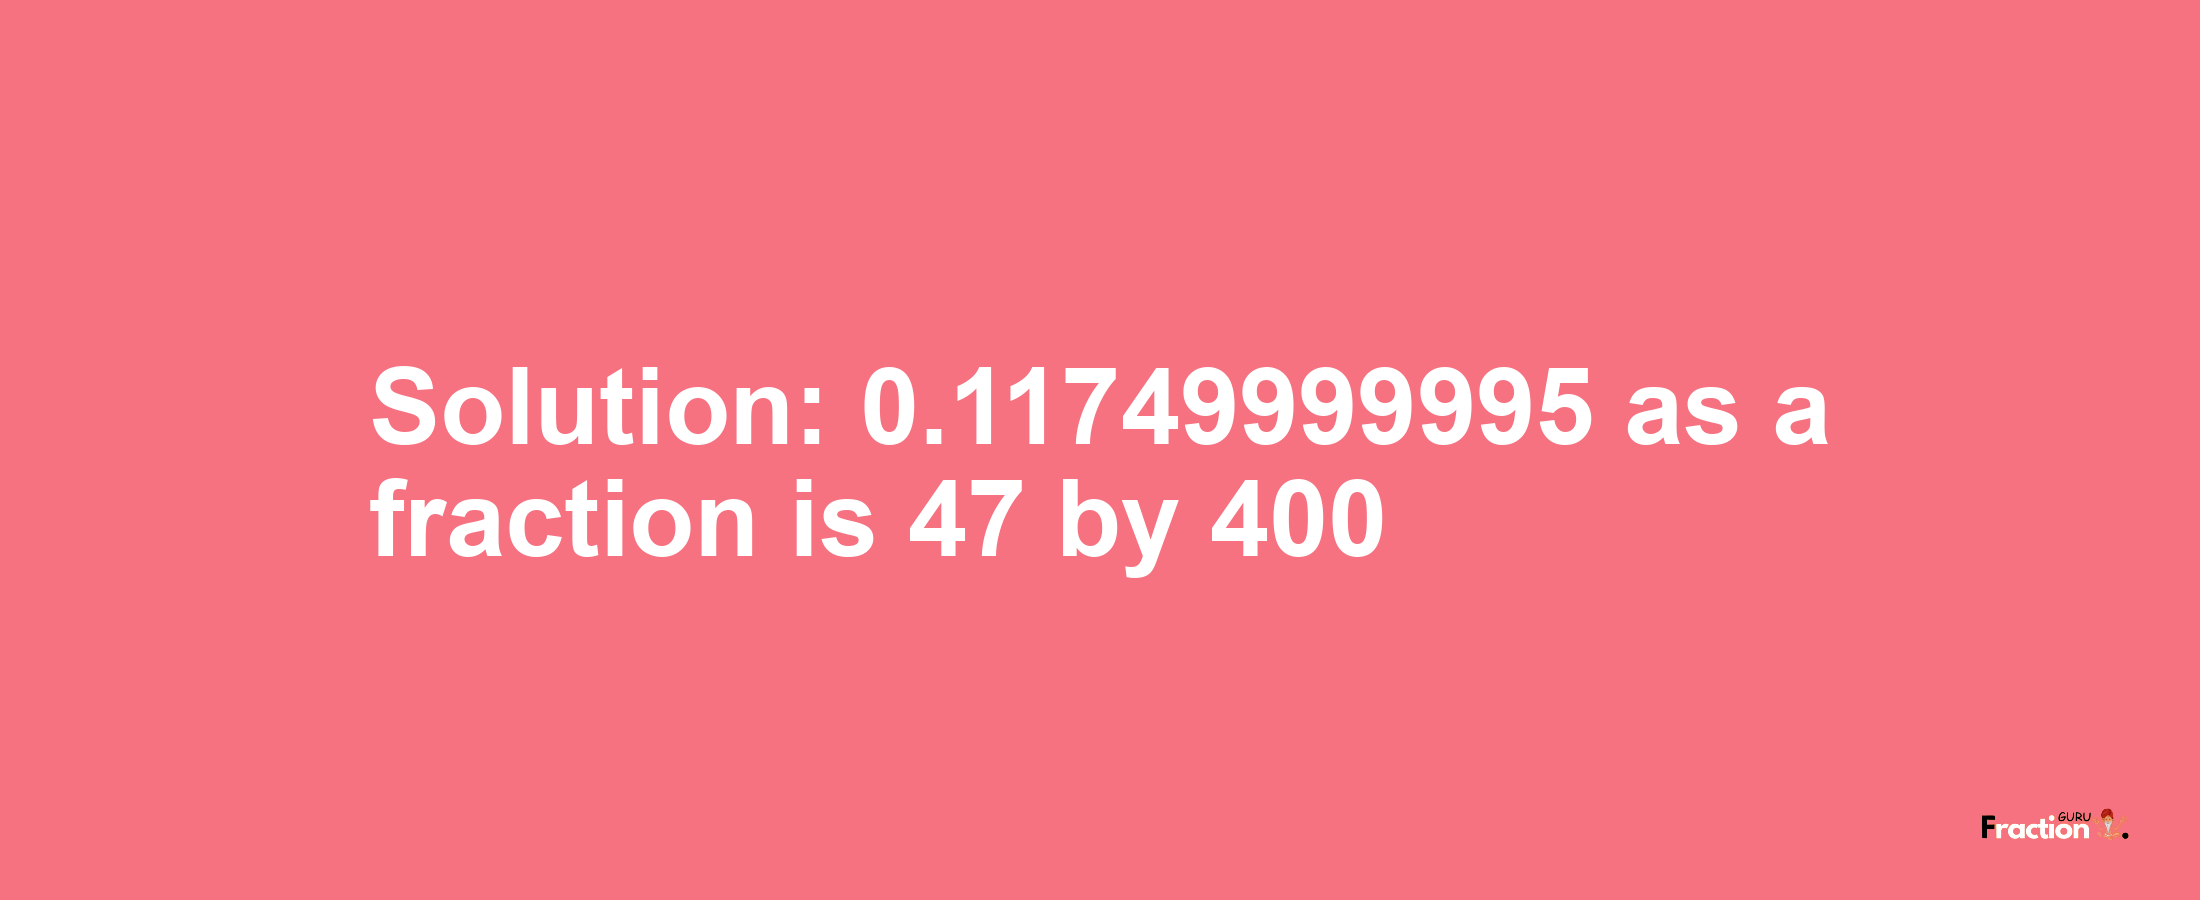 Solution:0.11749999995 as a fraction is 47/400